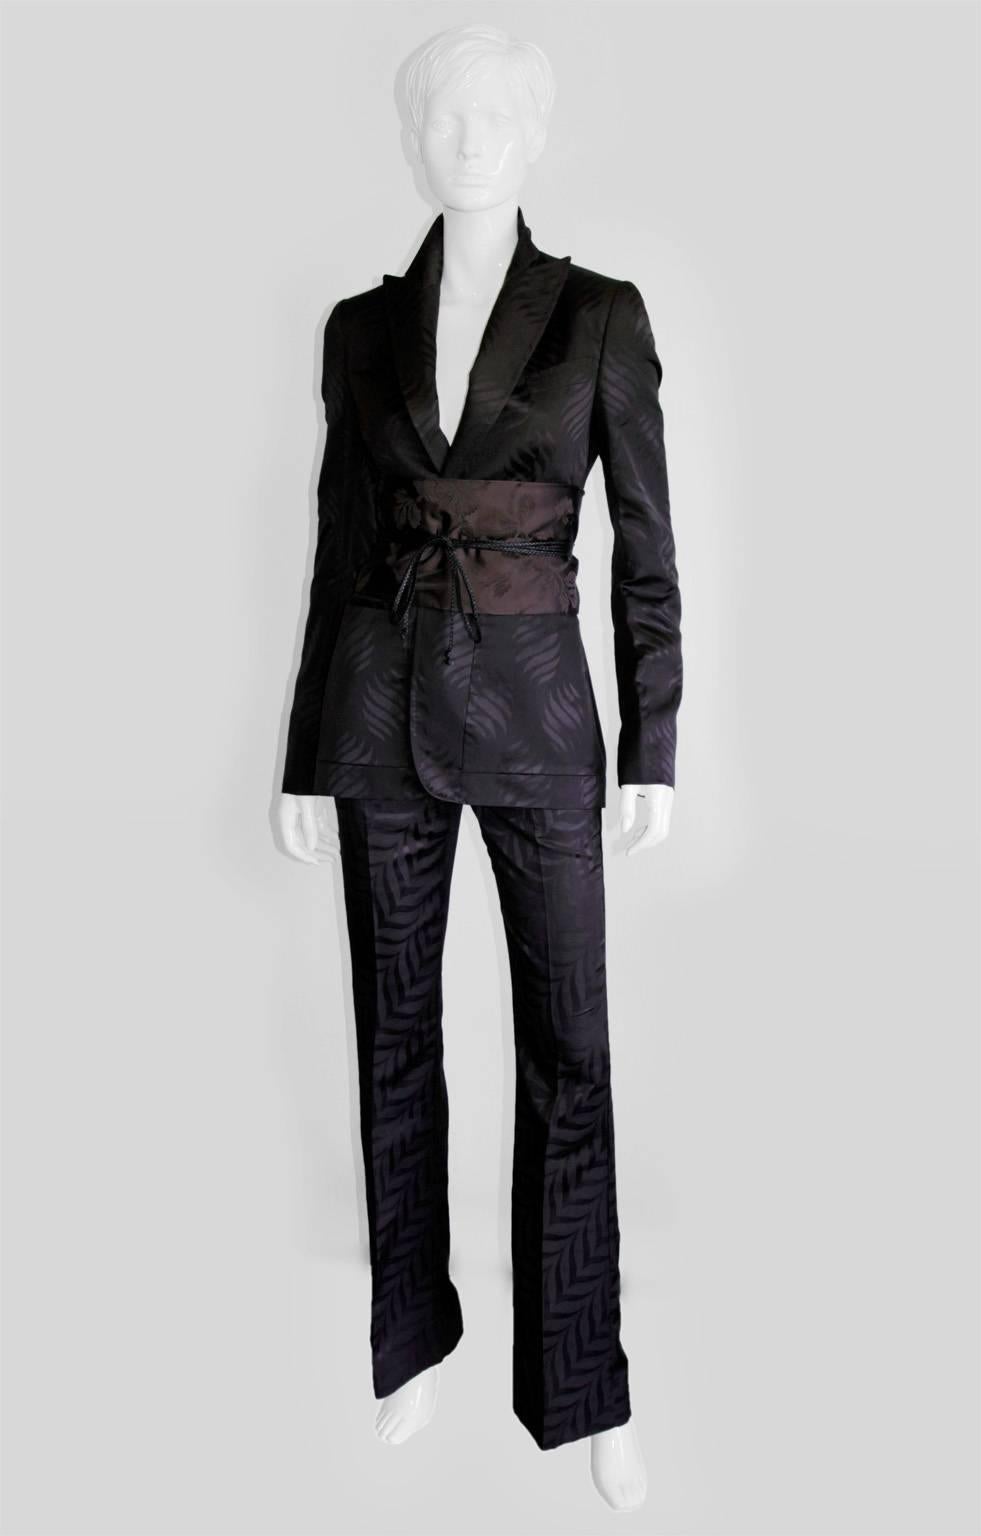 Iconic Tom Ford Gucci FW 2002 Gothic Collection Silk Kimono Jacket, Pants & Obi!

Who could ever forget Tom Ford's fall/winter 2002 Gothic Collection for Gucci... with that dark chinoiseriesque styling & heavenly detailing? Well, this